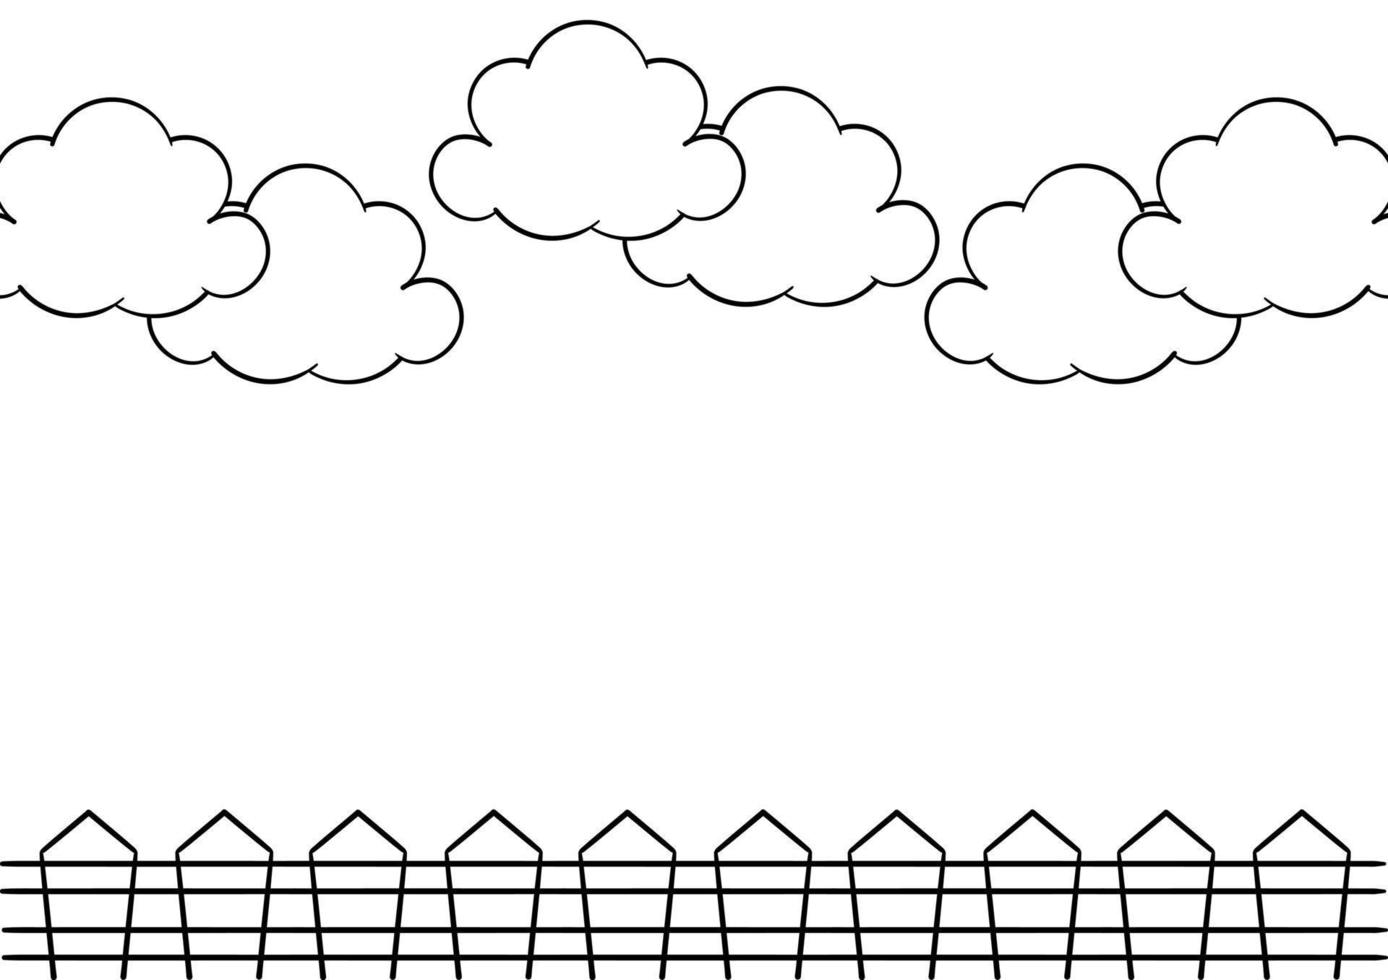 hand drawn background of fences and clouds vector